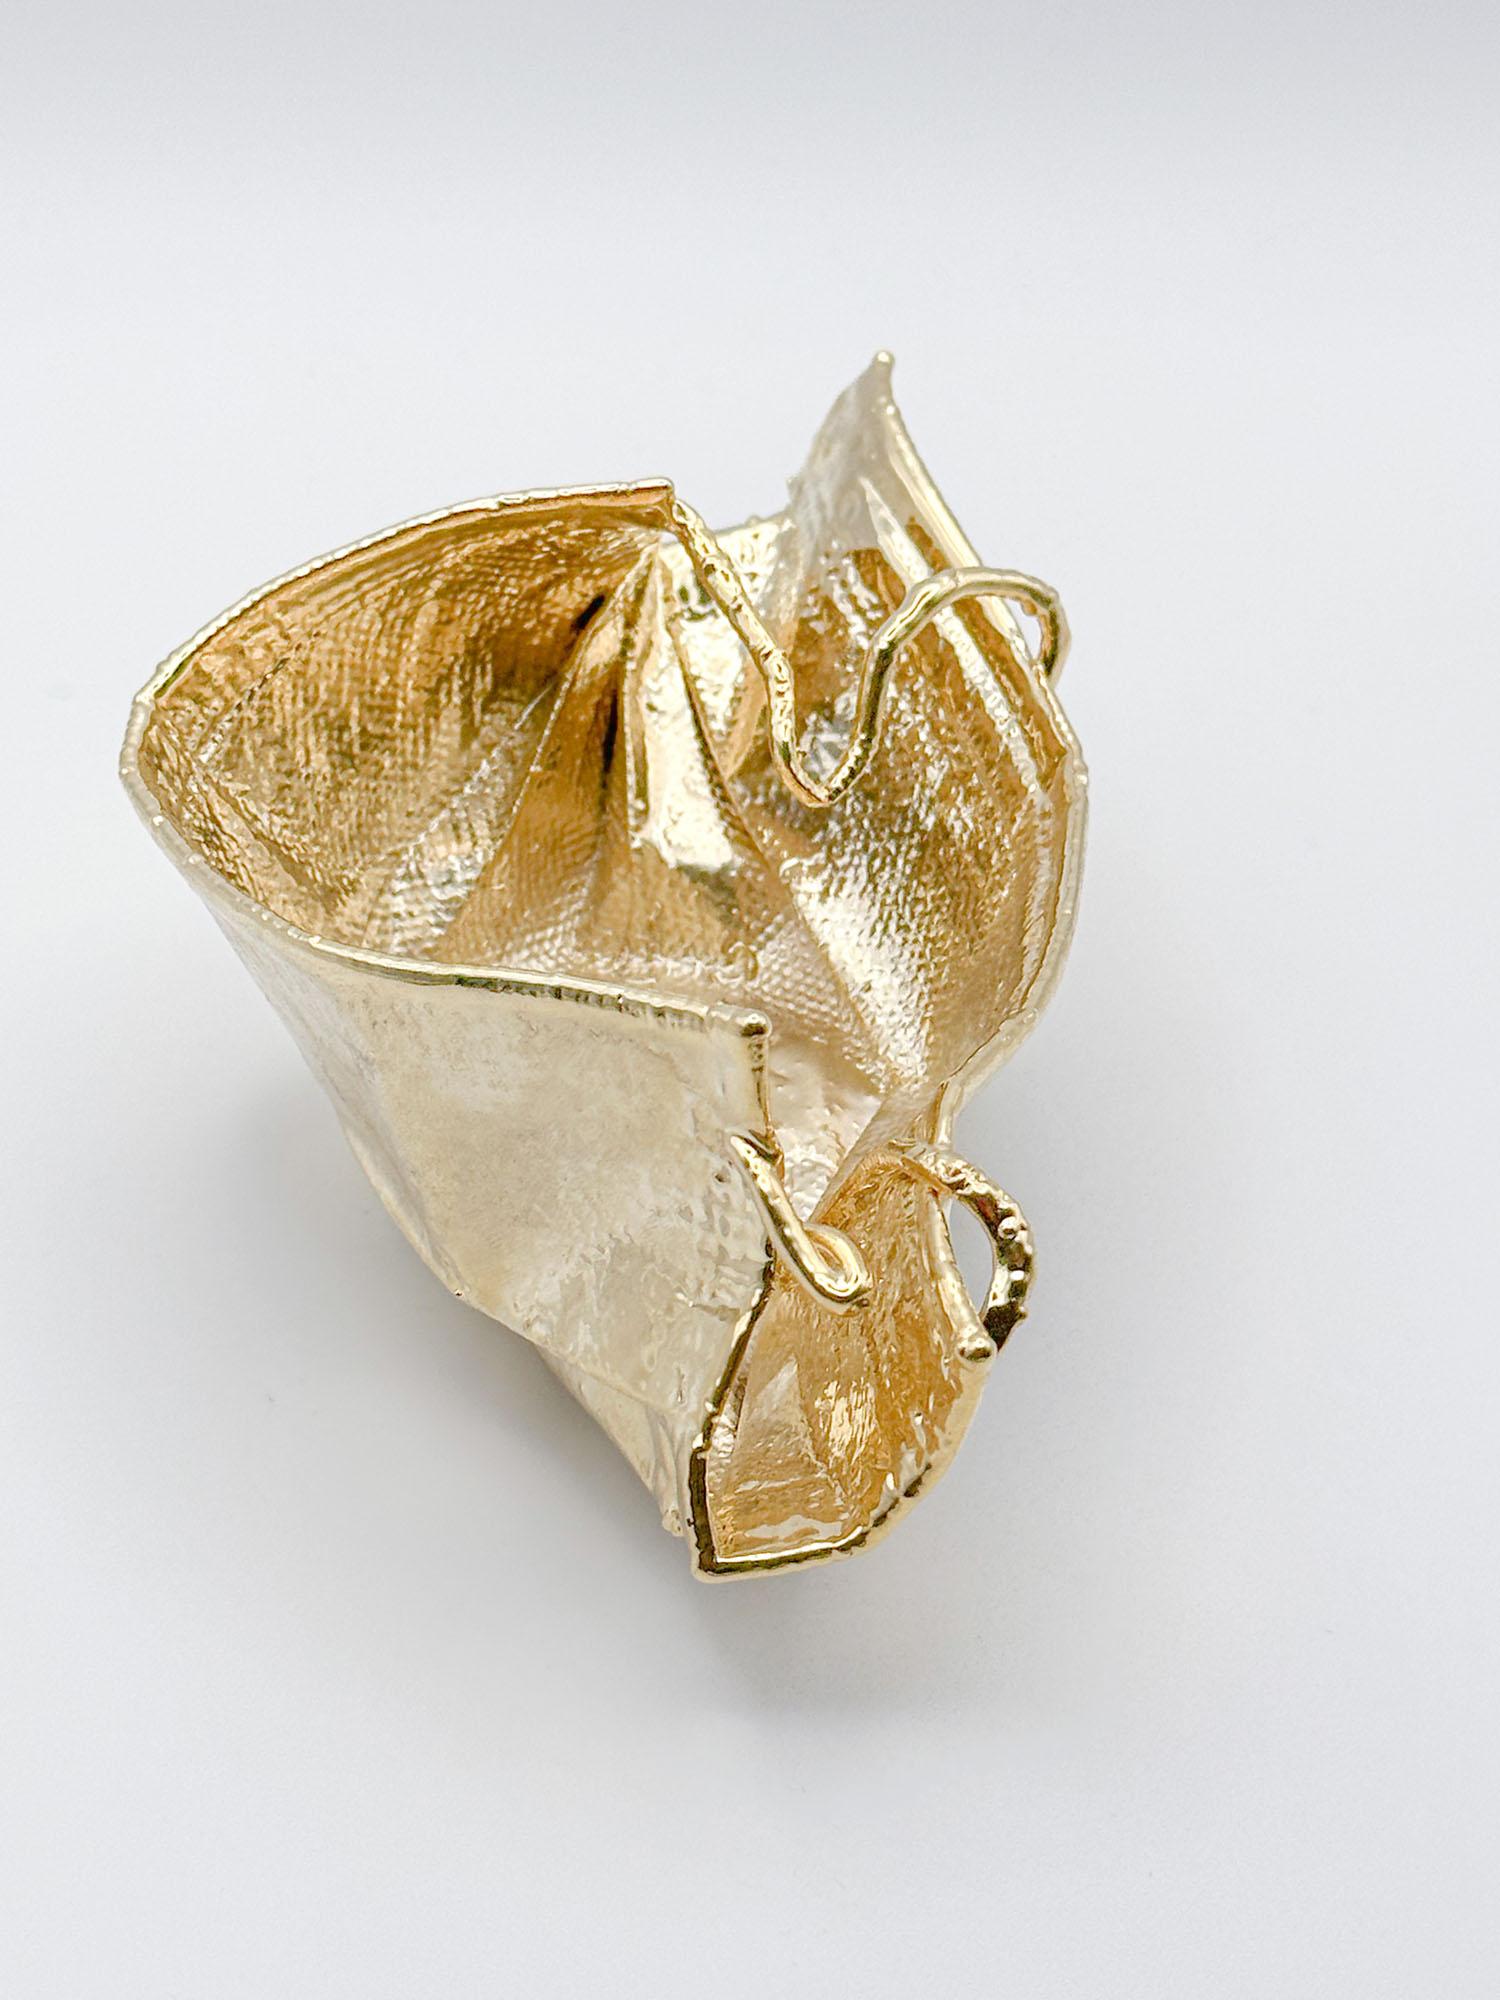 Post-Modern Remask Act 001 Gold Art Object Made from Surgical Mask by Enrico Girotti For Sale